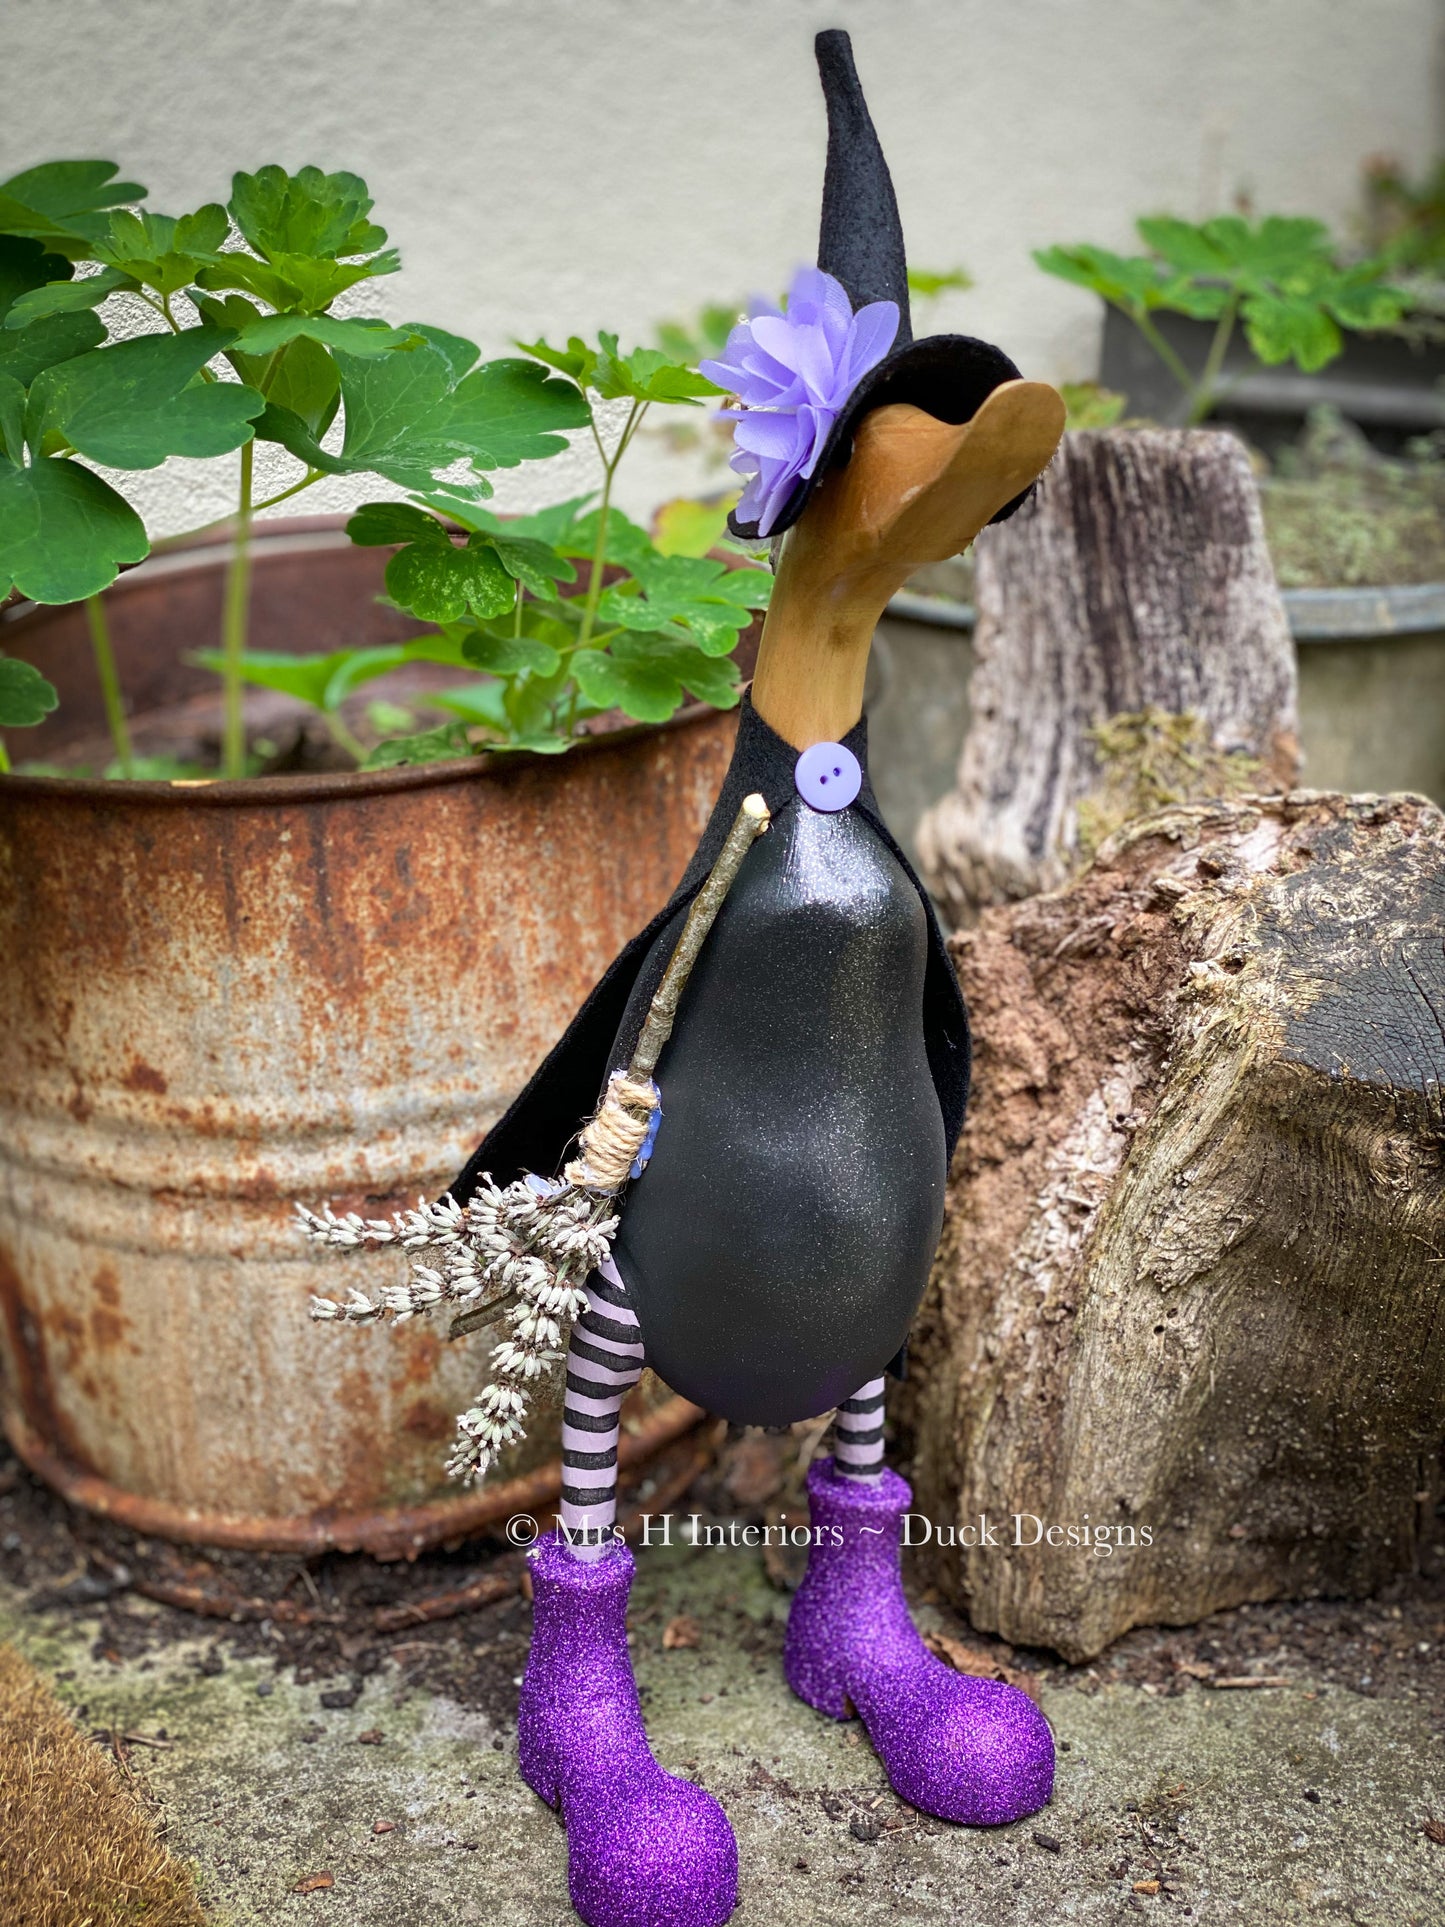 Jean The Witch Duck in Green - Decorated Wooden Duck in Boots by Mrs H the Duck Lady